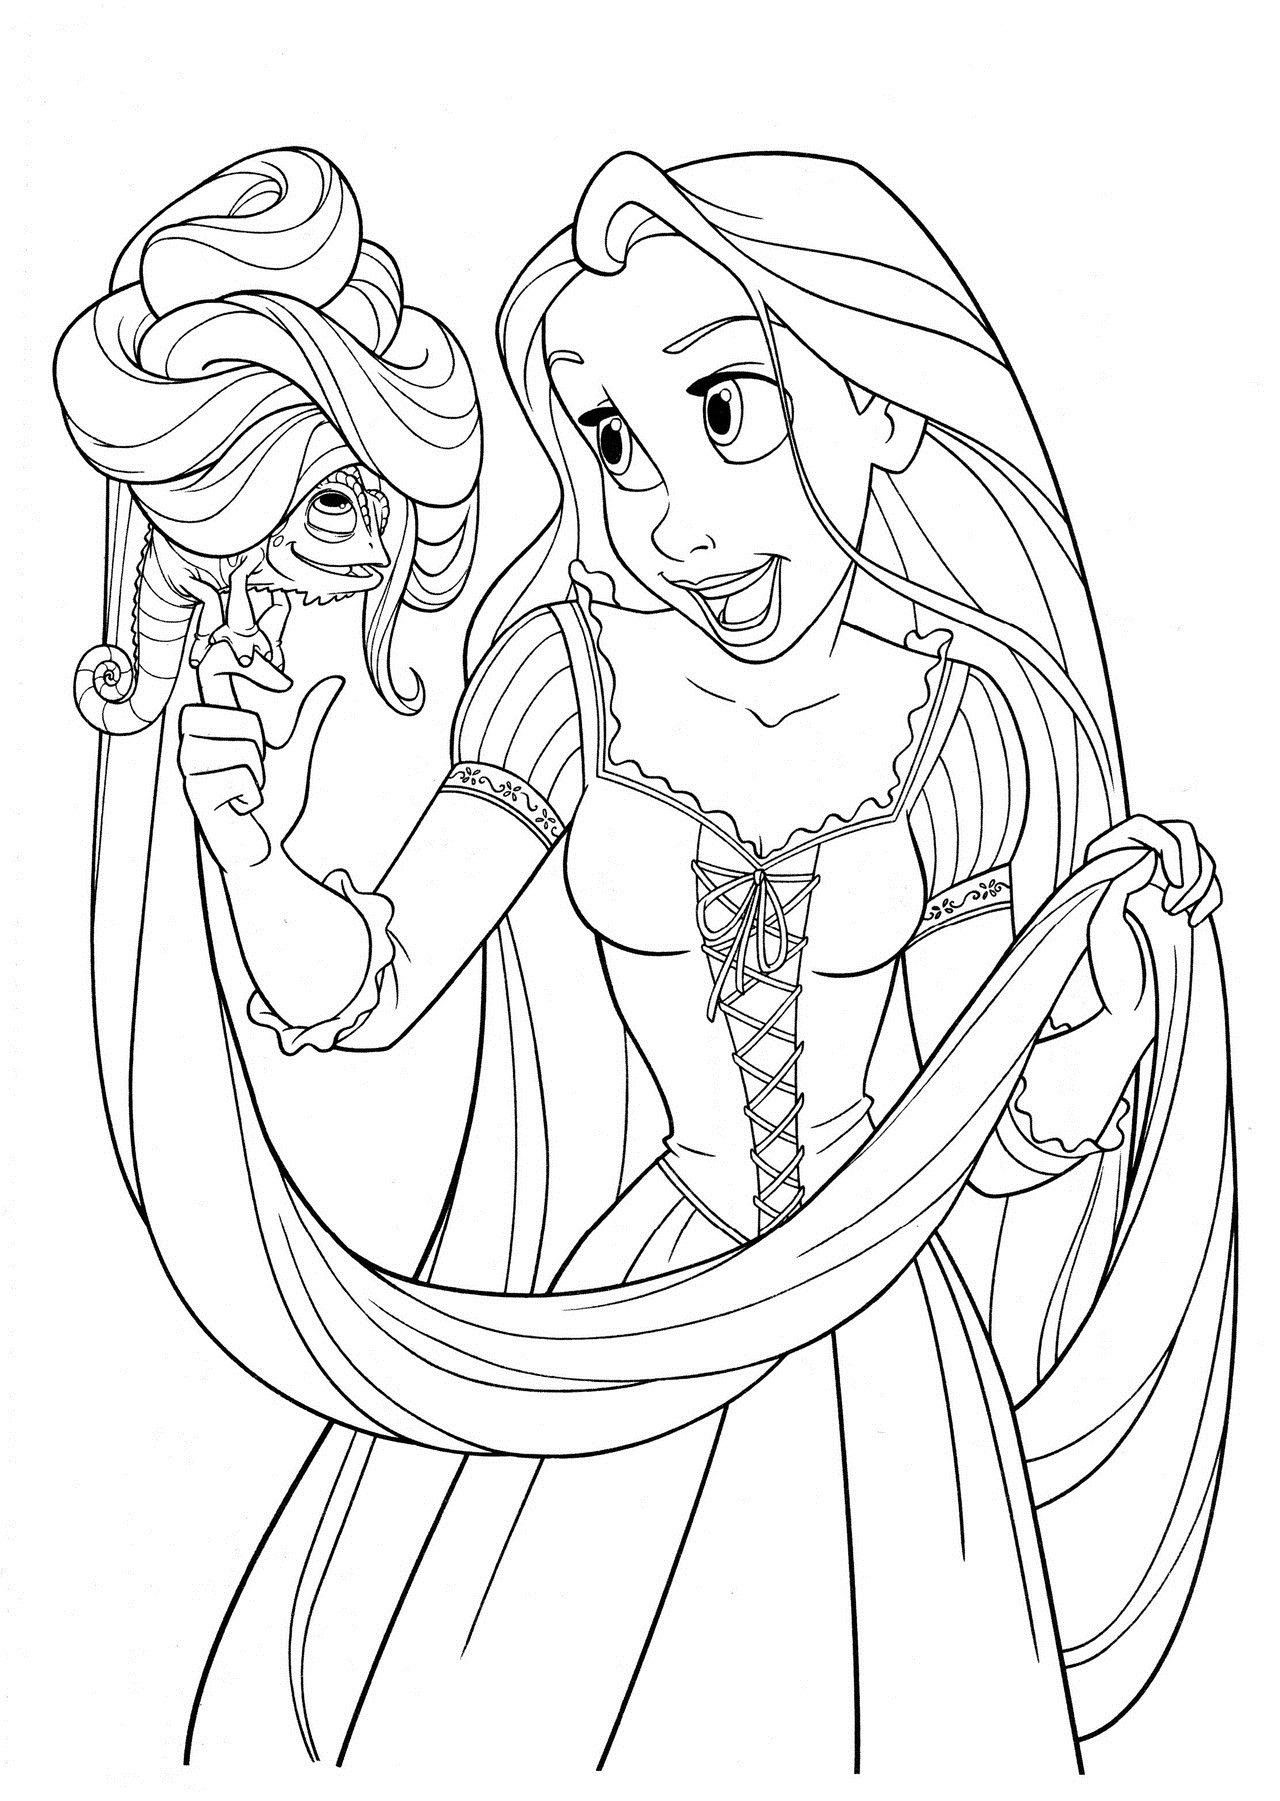 Free Downloadable Coloring Pages For Toddlers
 Free Printable Tangled Coloring Pages For Kids